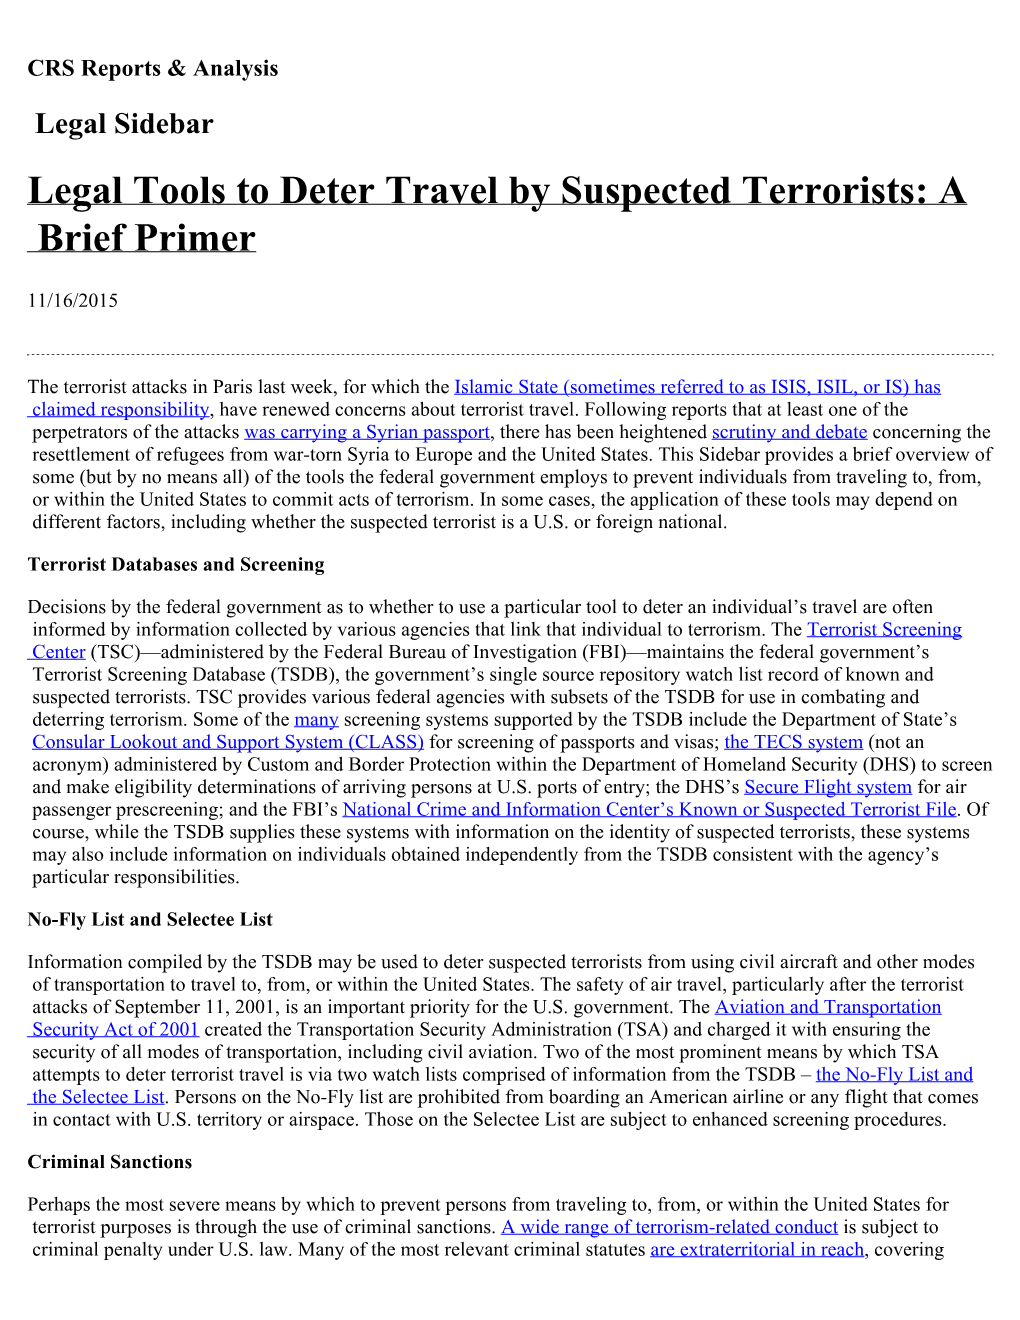 Legal Tools to Deter Travel by Suspected Terrorists: a Brief Primer